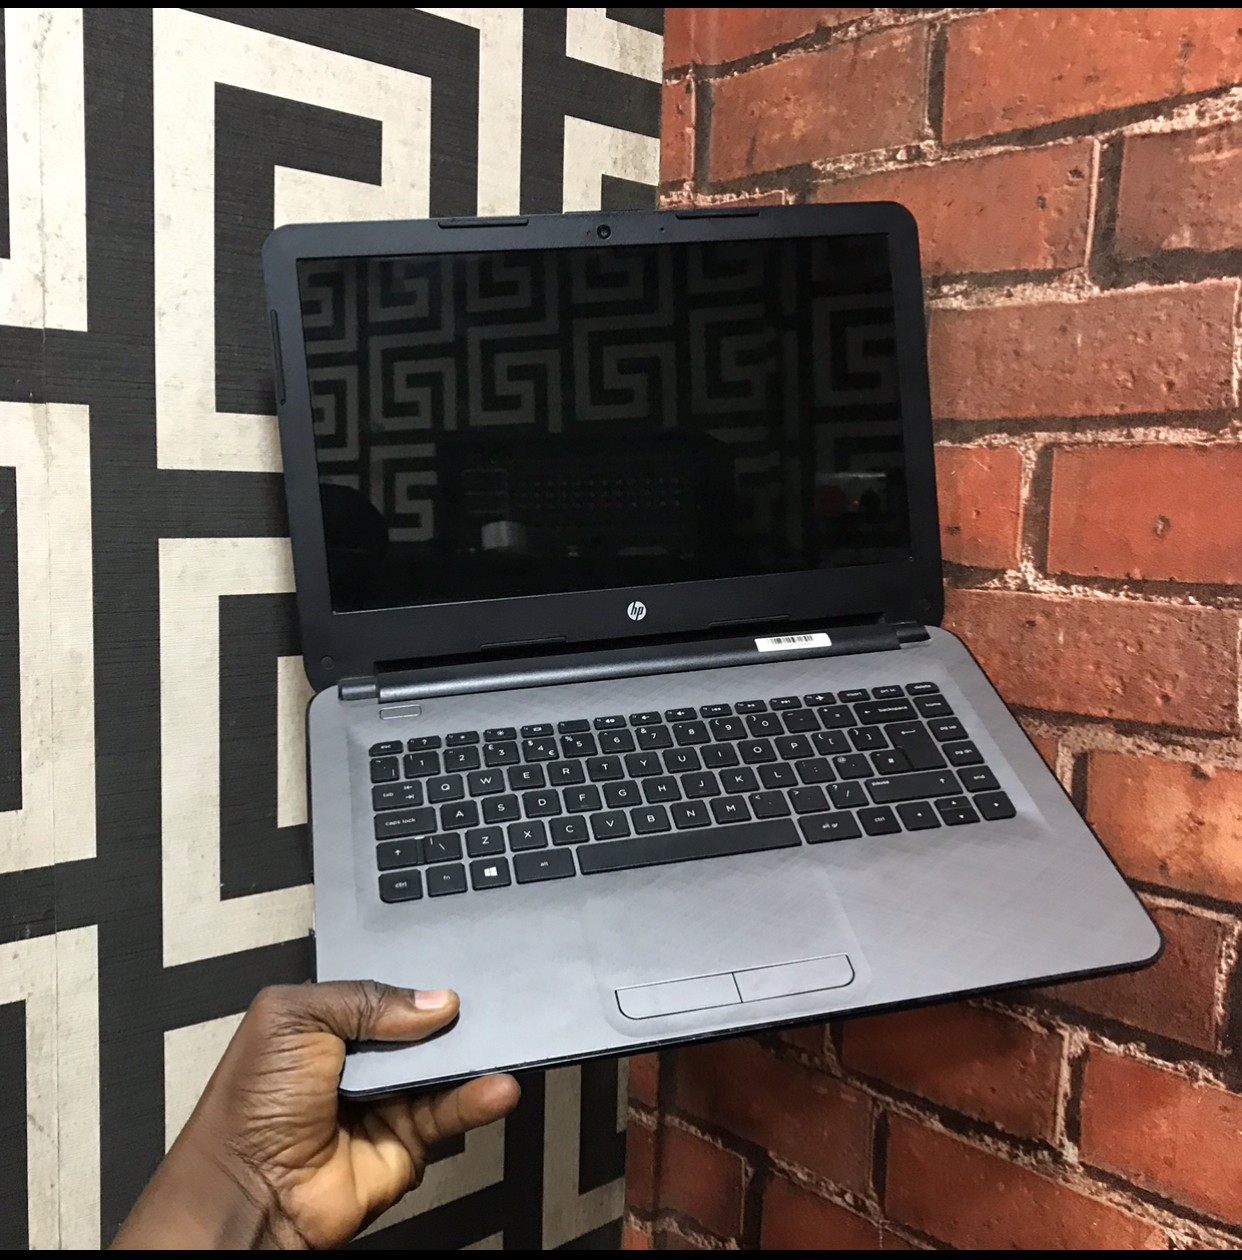 2Gb Ram, 320Gb Hdd, 2Hours Ba3 life, Hp 14 Laptop For-Sale